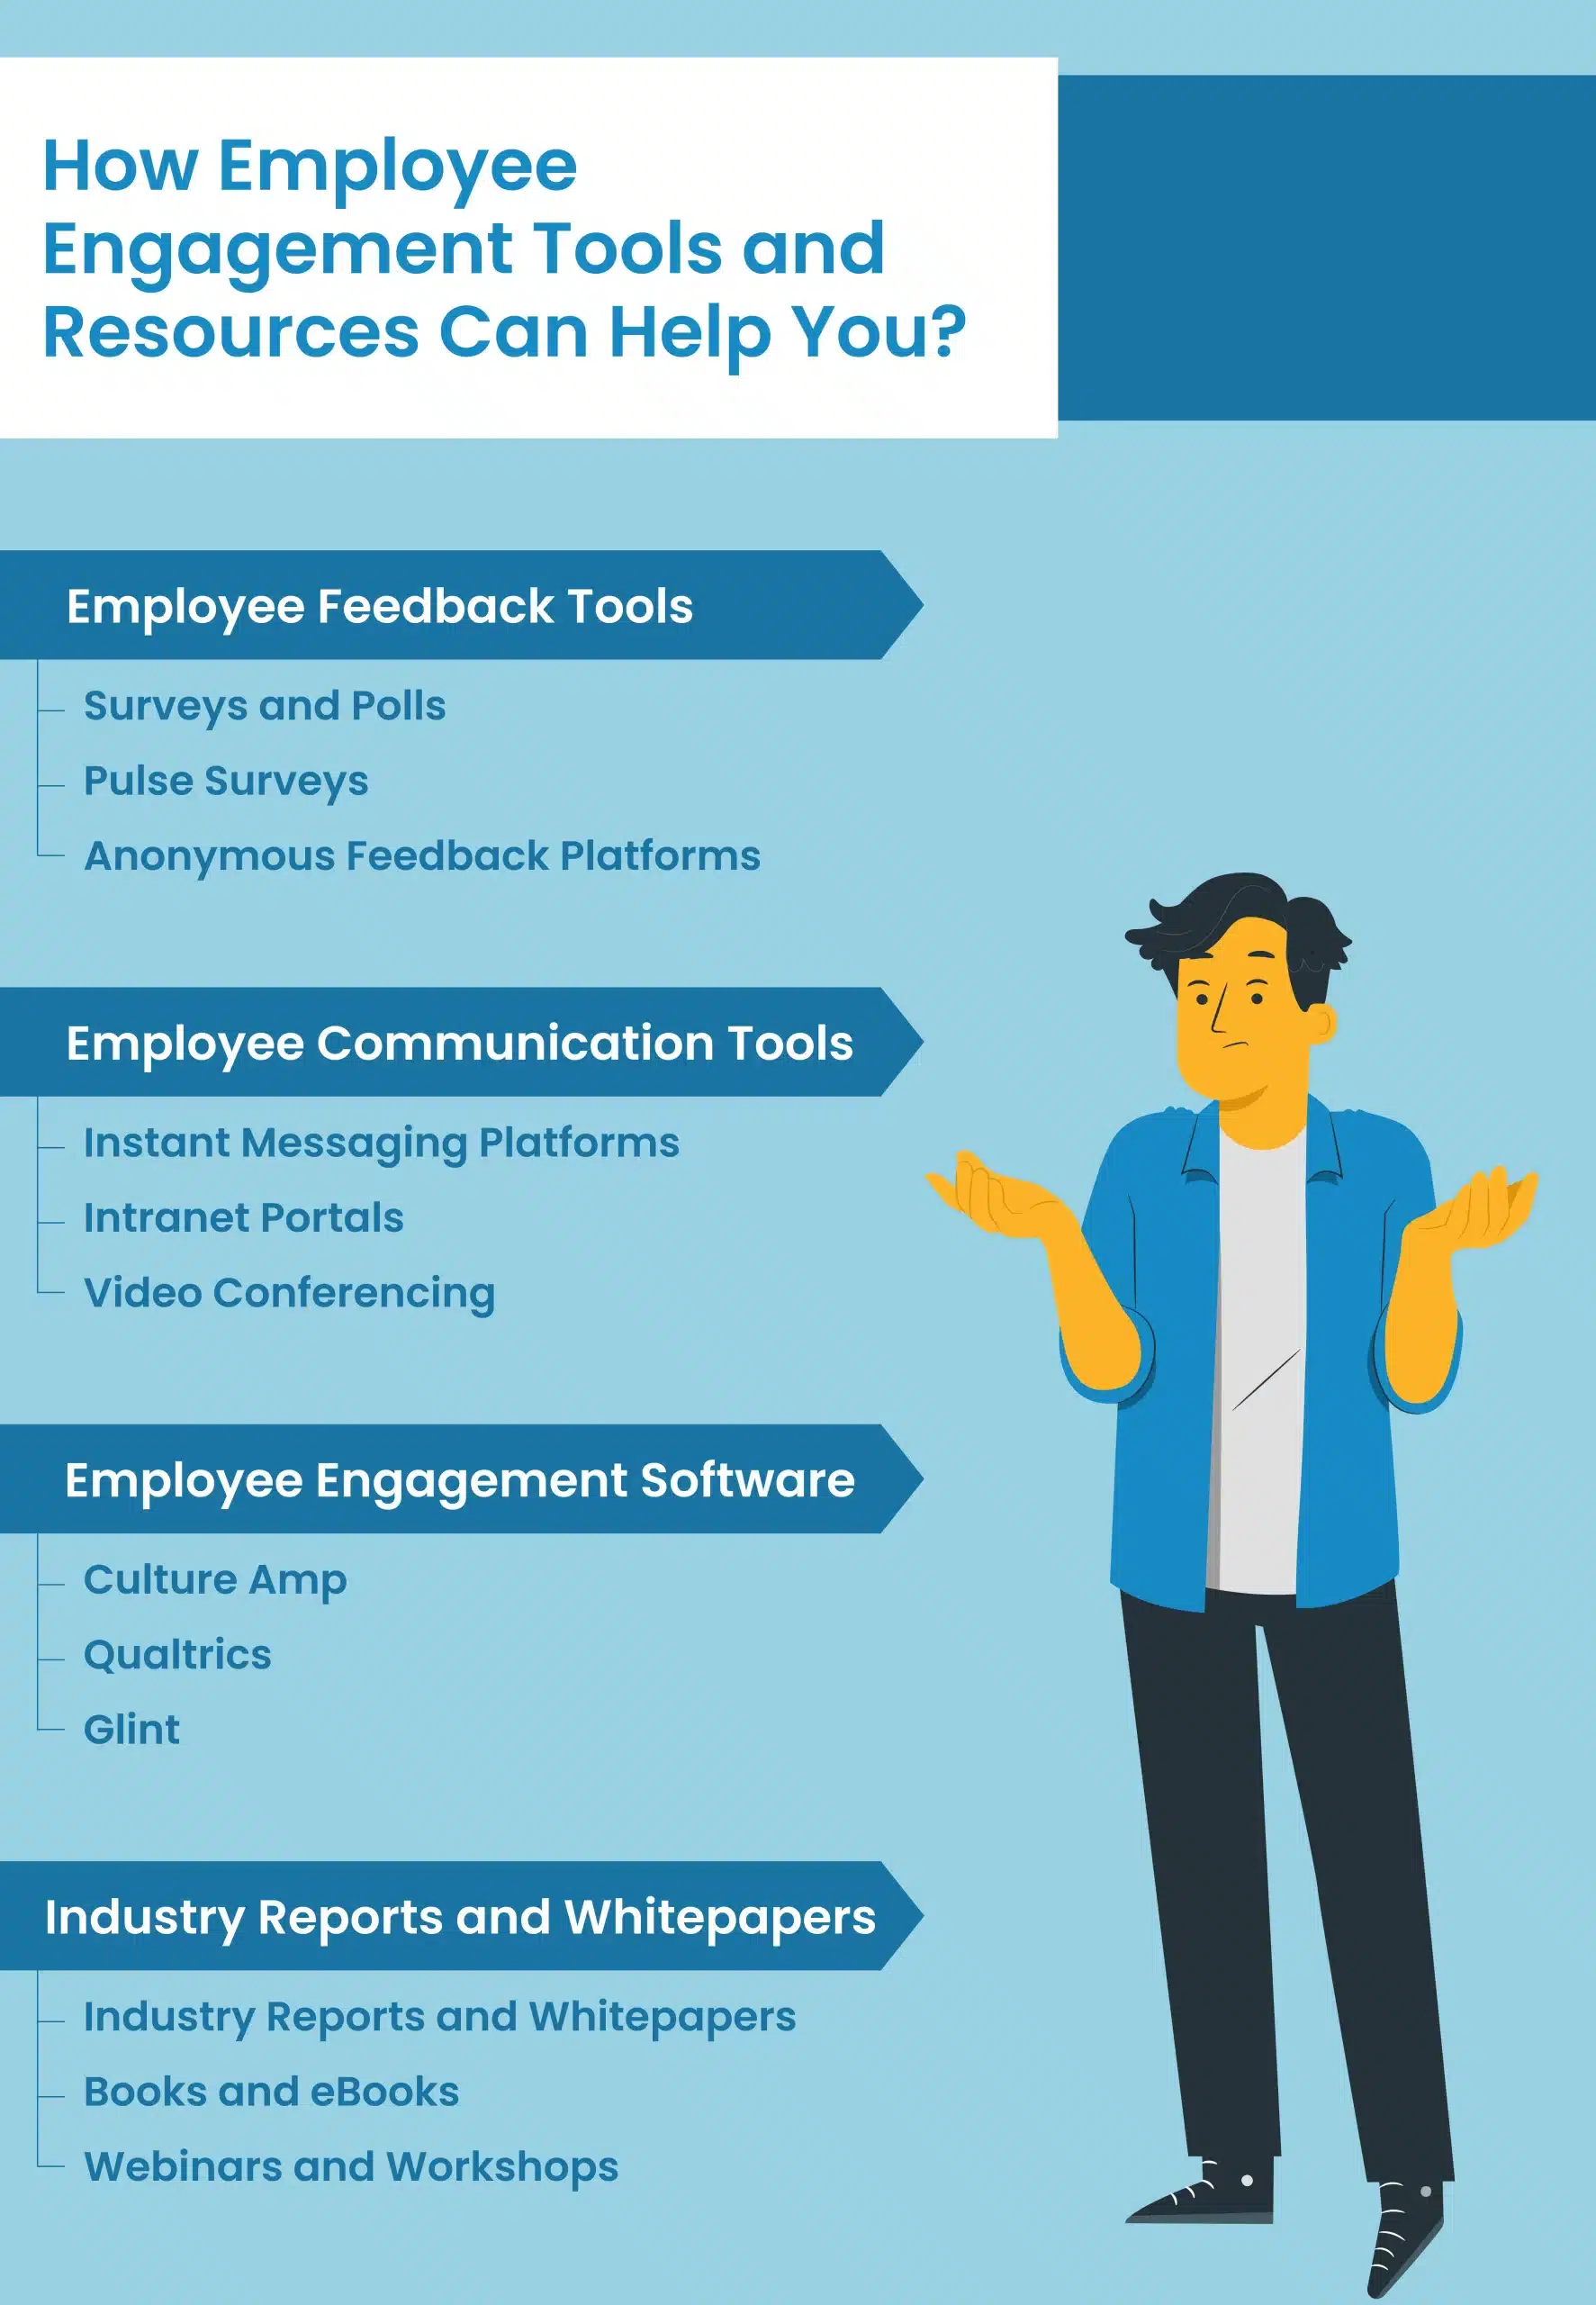 How Employee Engagement Tools and Resources Can Help You